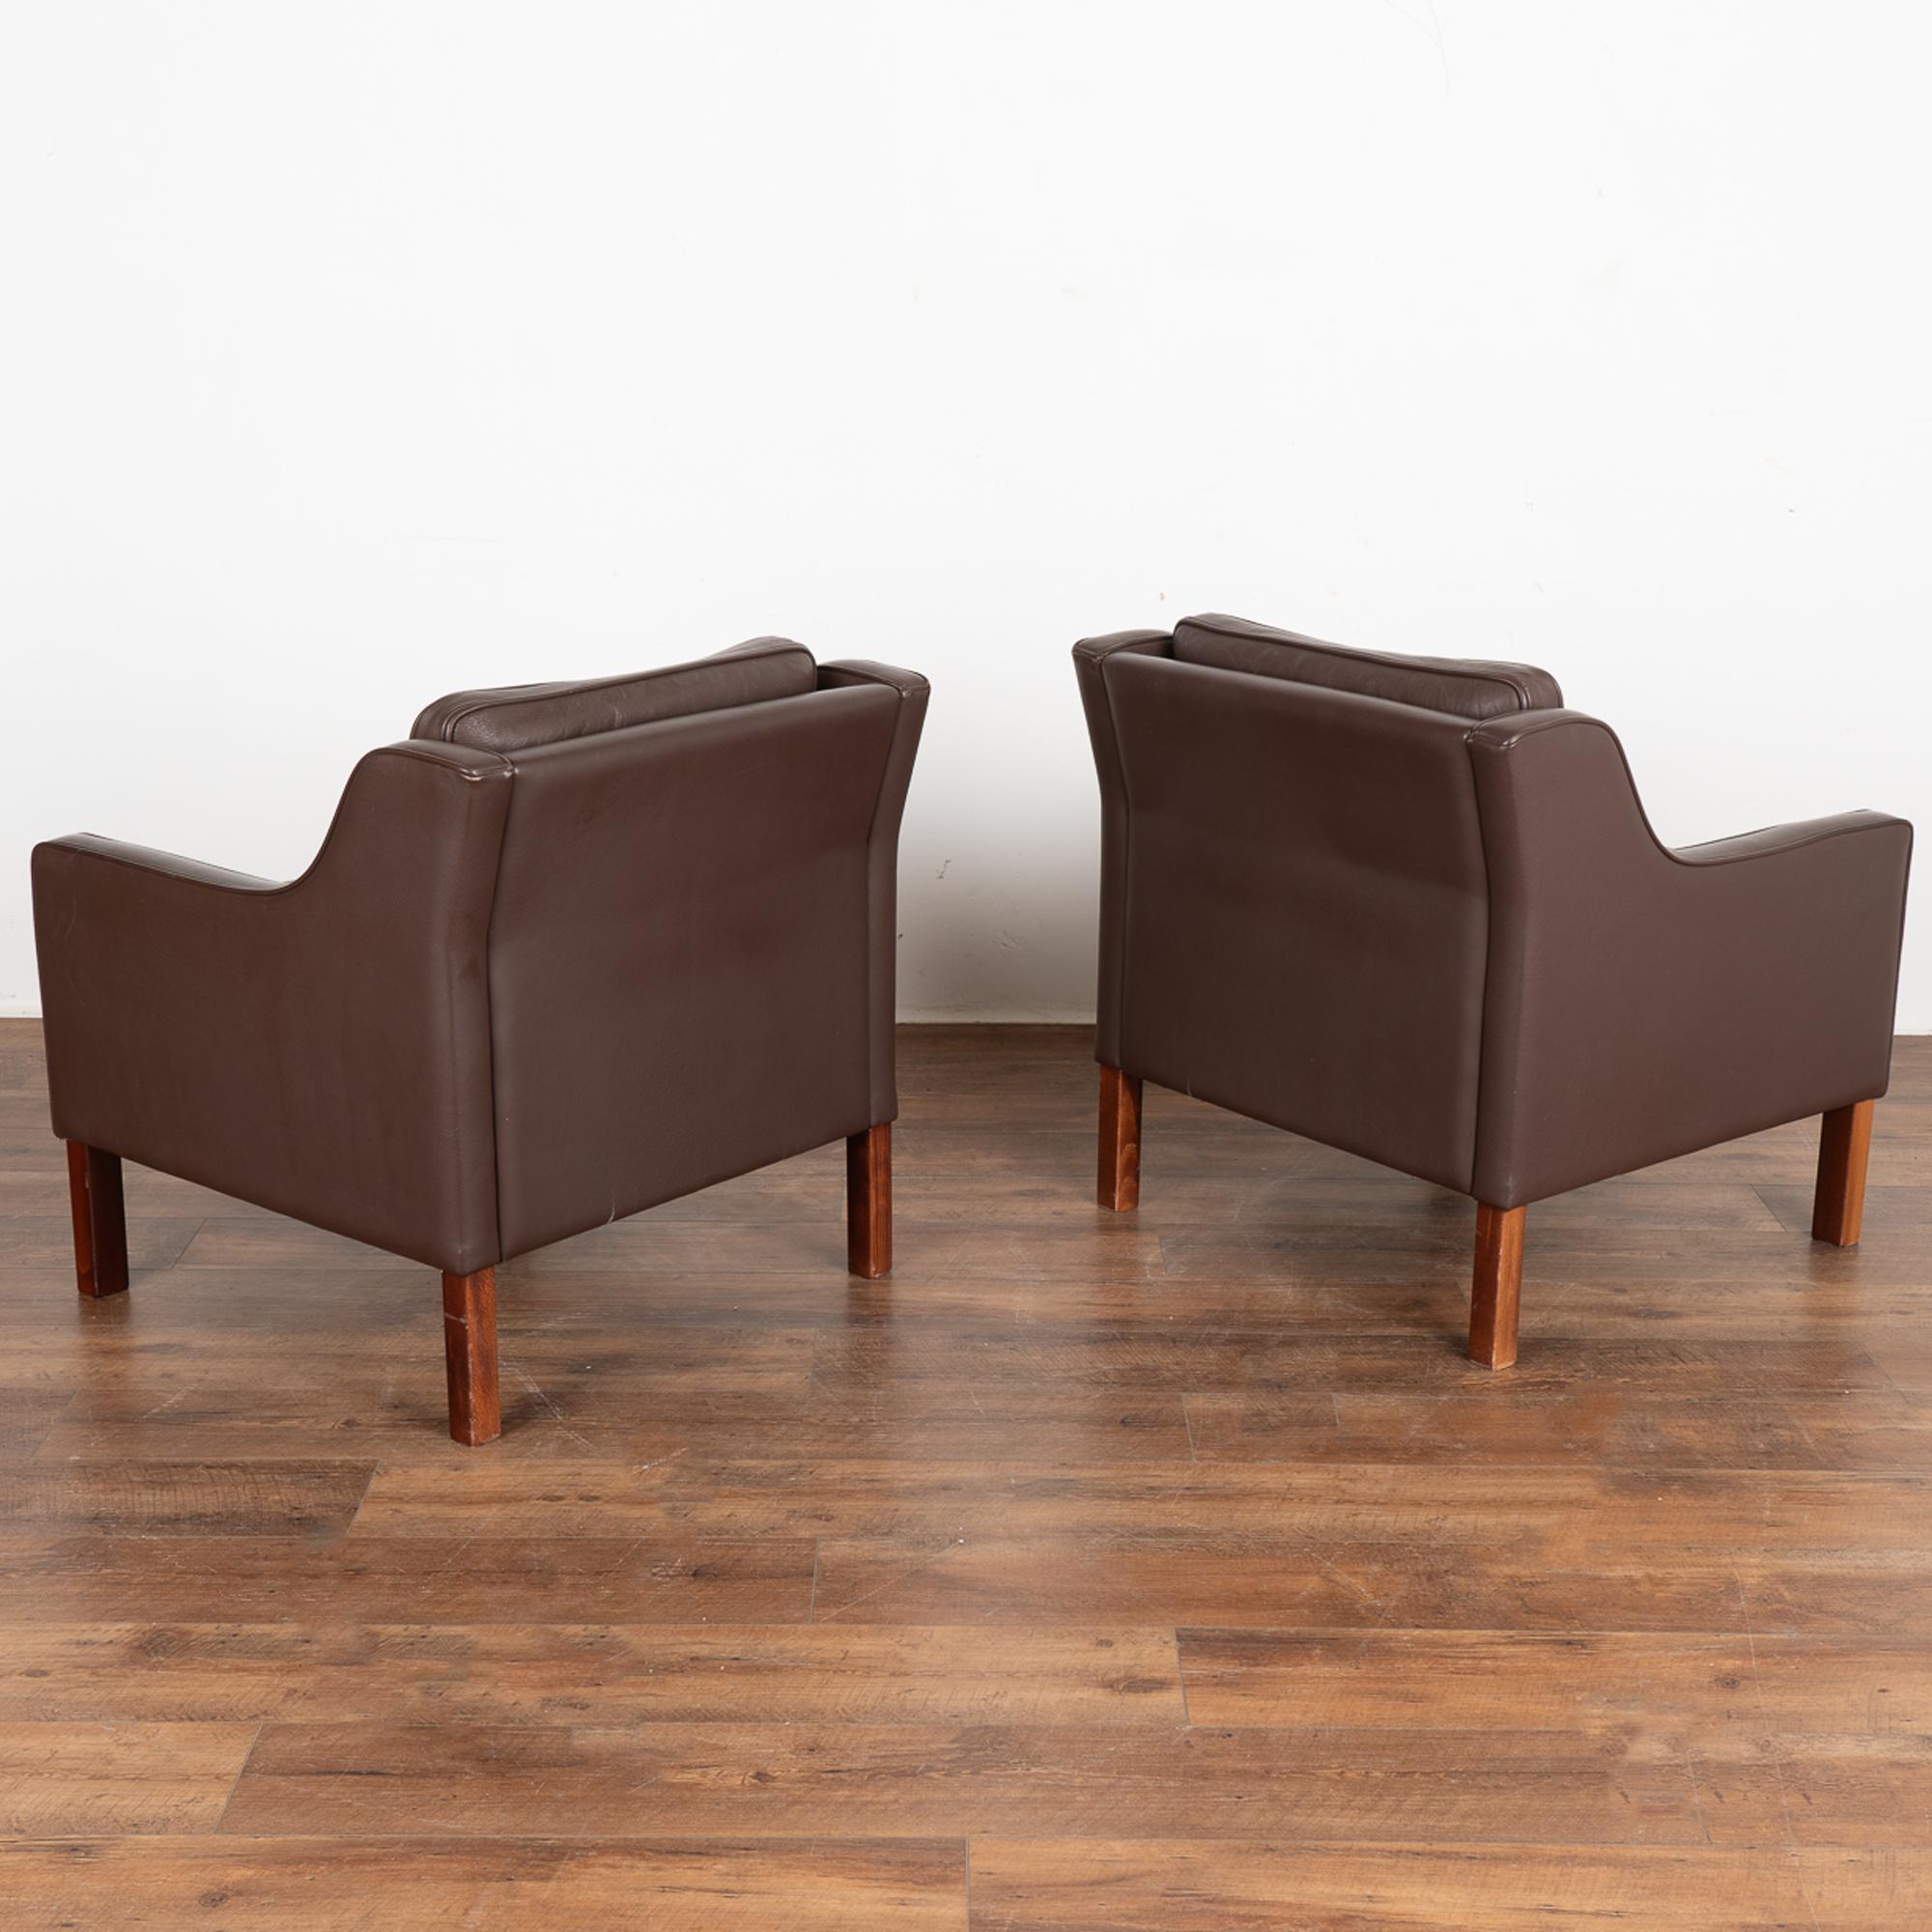 Pair, Midcentury Brown Leather Arm Chairs, Denmark, circa 1960-70 For Sale 5